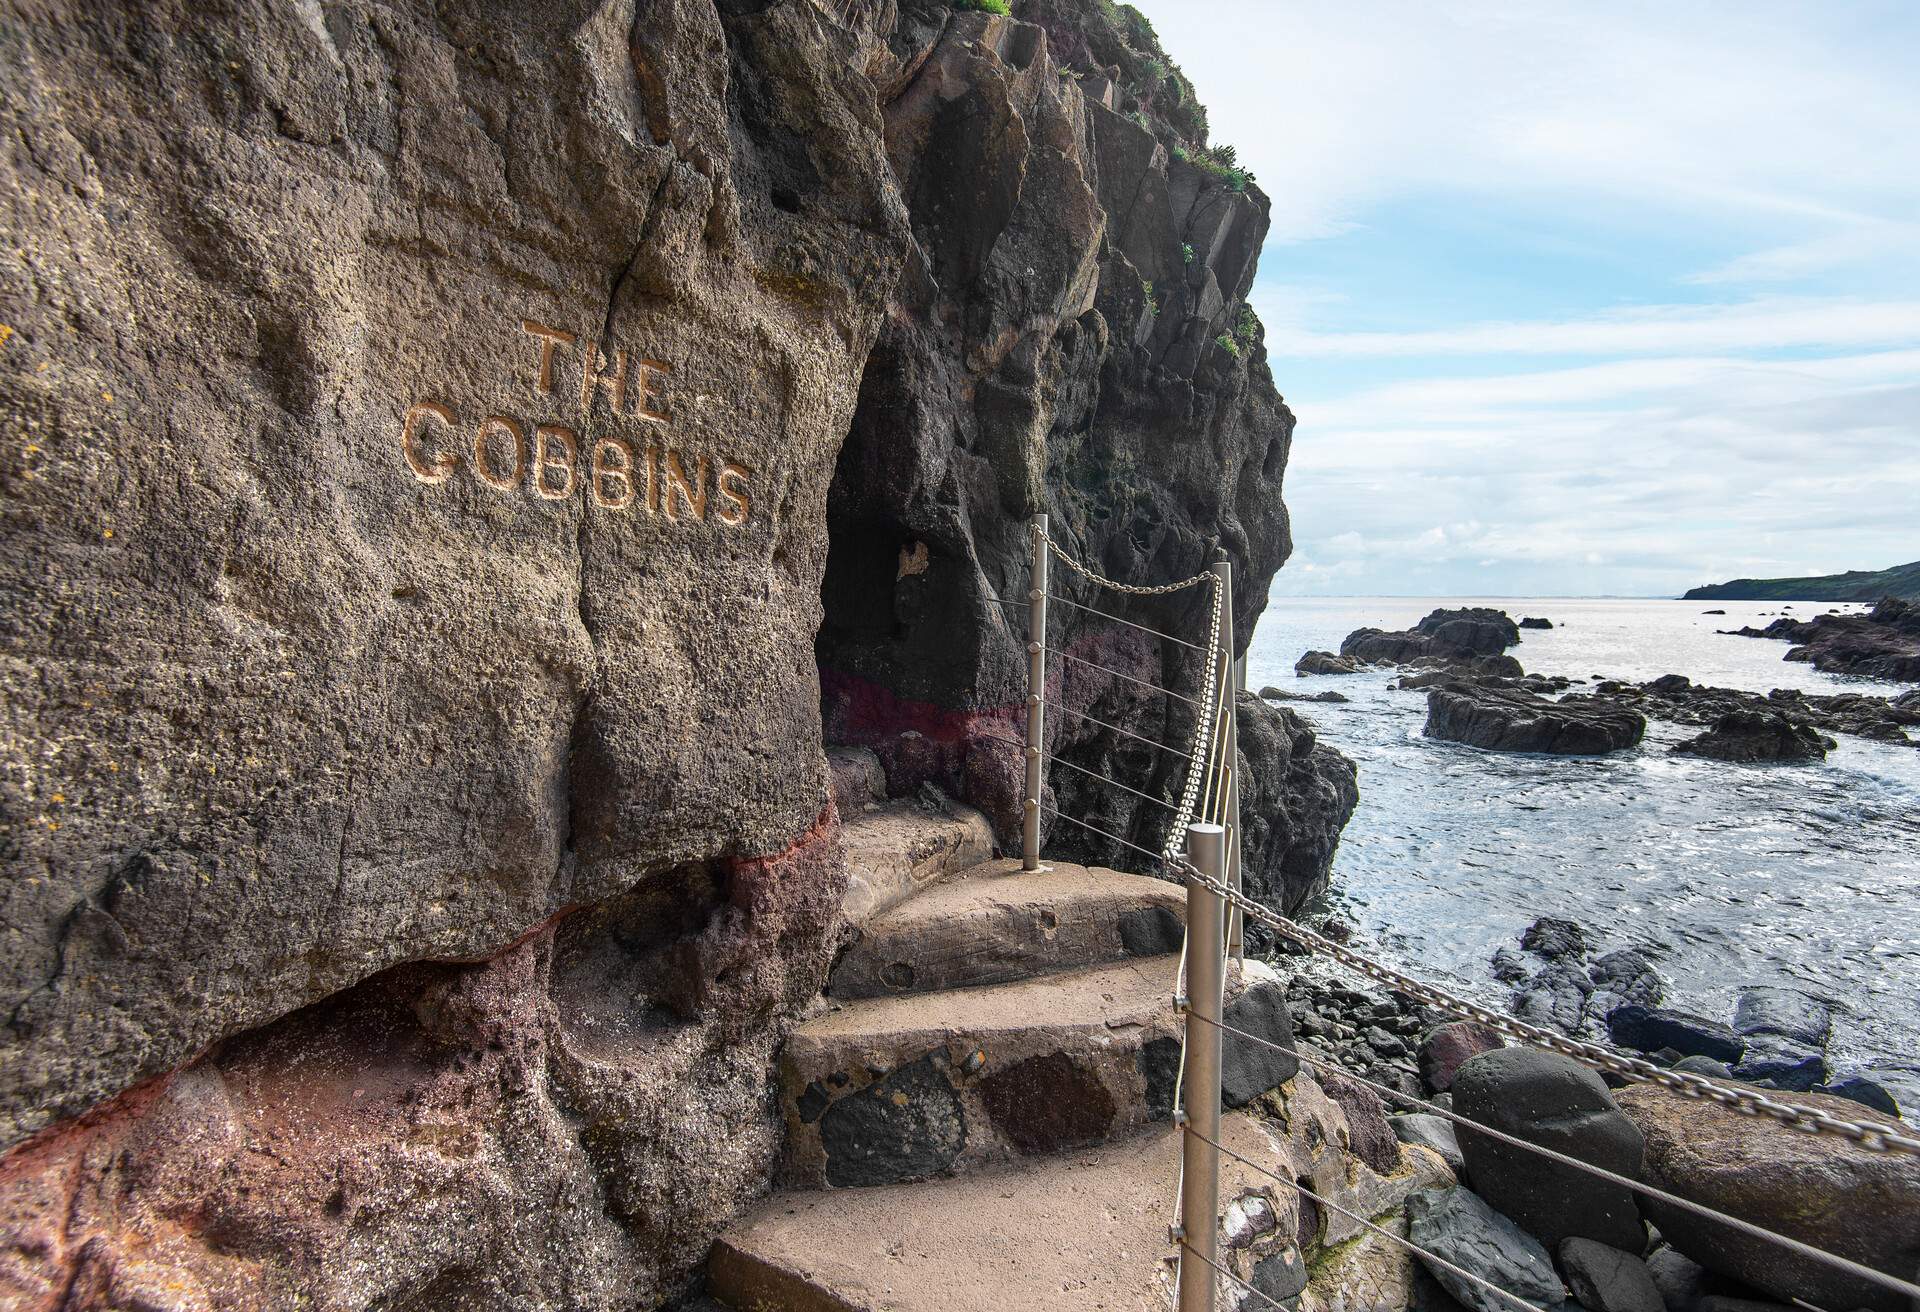 Entrance sign to The Gobbins Path, a cliff path along the cliffs of the Irish sea in County Antrim, near Belfast.